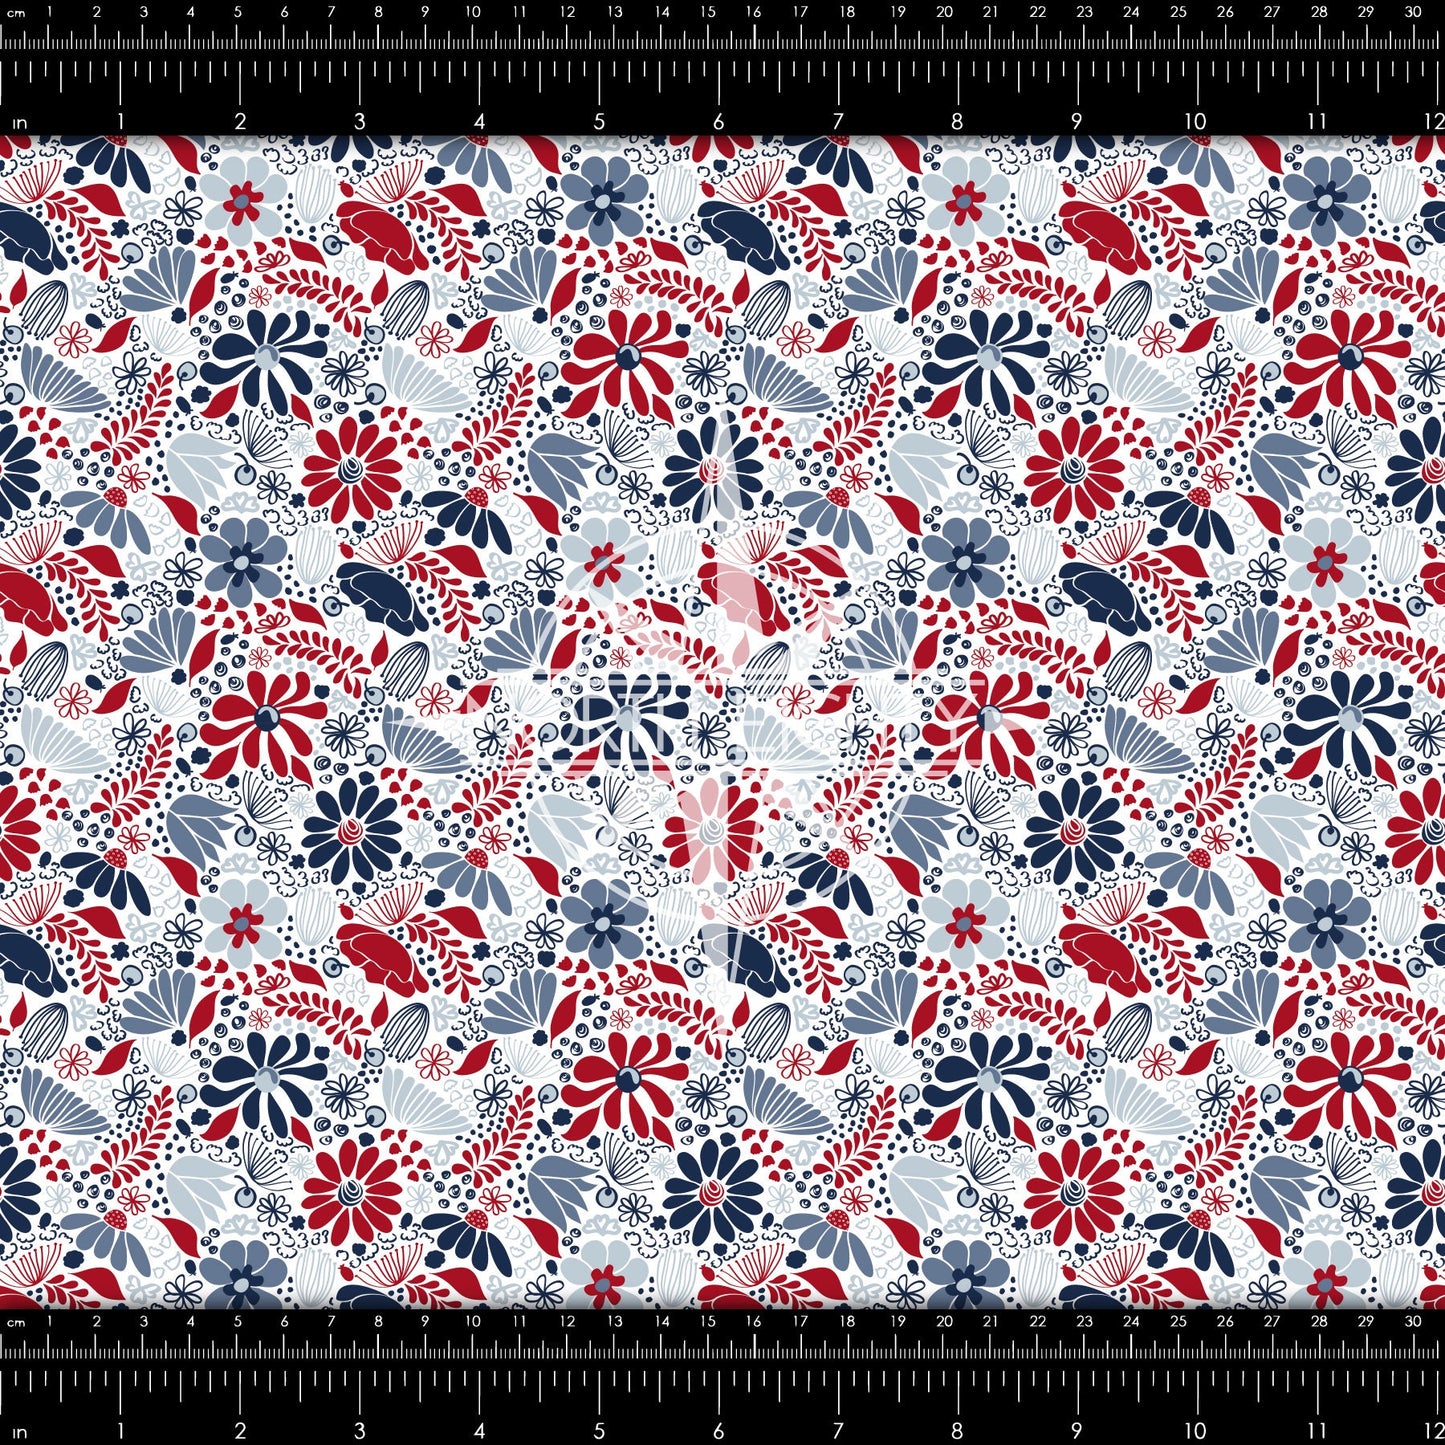 Patriotic Printed Vinyl - Floral Heat Transfer Vinyl - htv Sheet - 4th of July - Independence Day - Memorial Day